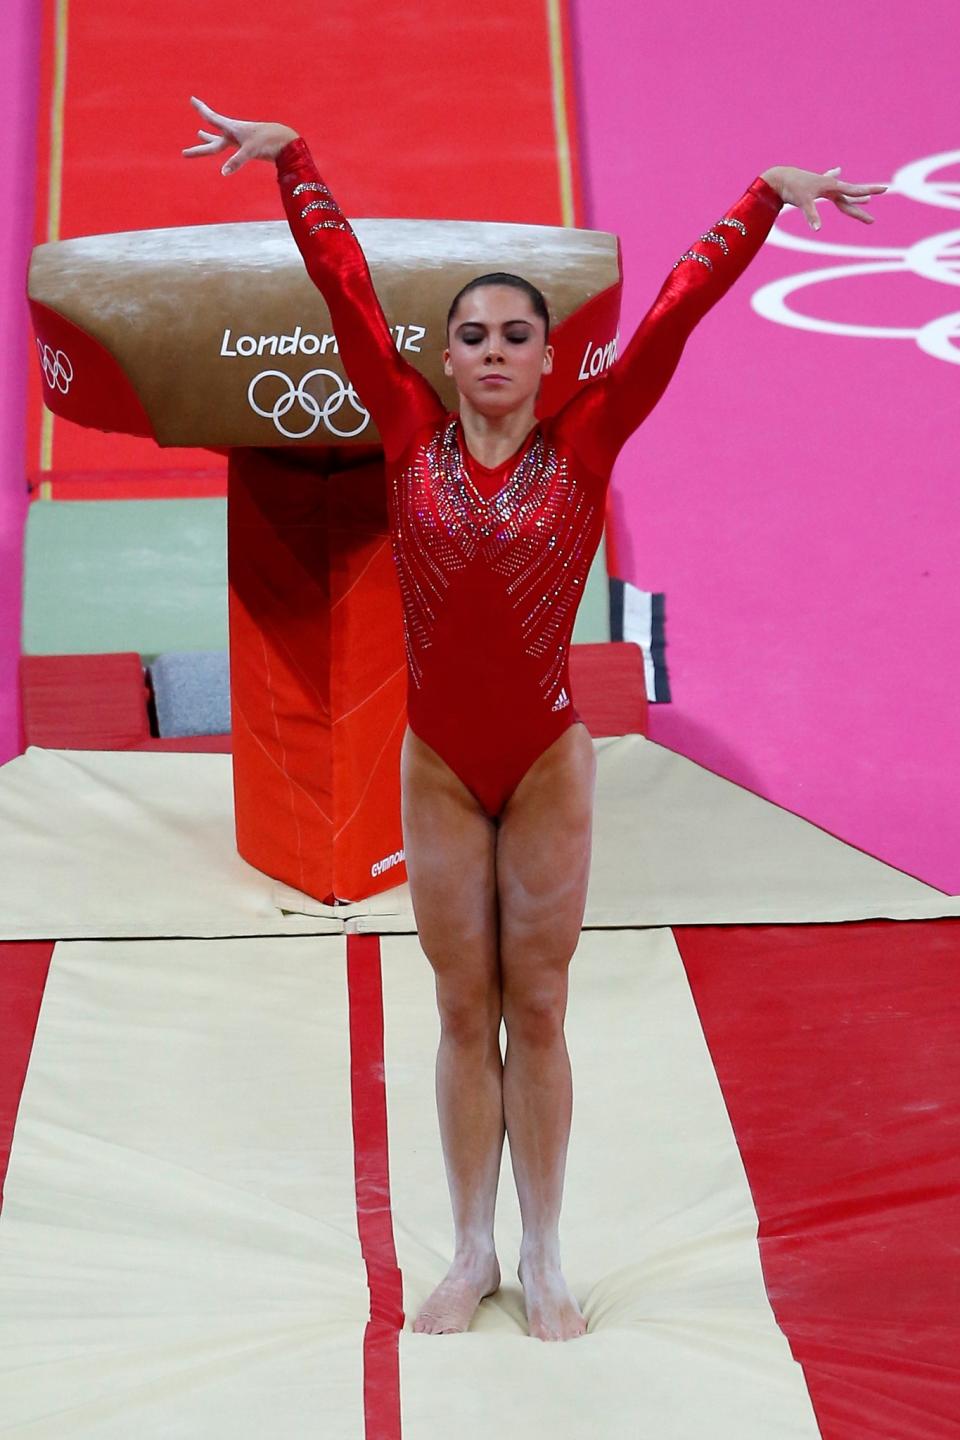 <p>McKayla Maroney Maroney of the United States of America celebrates her performance on the vault in the Artistic Gymnastics Women’s Team final on Day 4 of the London 2012 Olympic Games at North Greenwich Arena on July 31, 2012 in London, England. (Photo by Jamie Squire/Getty Images) </p>